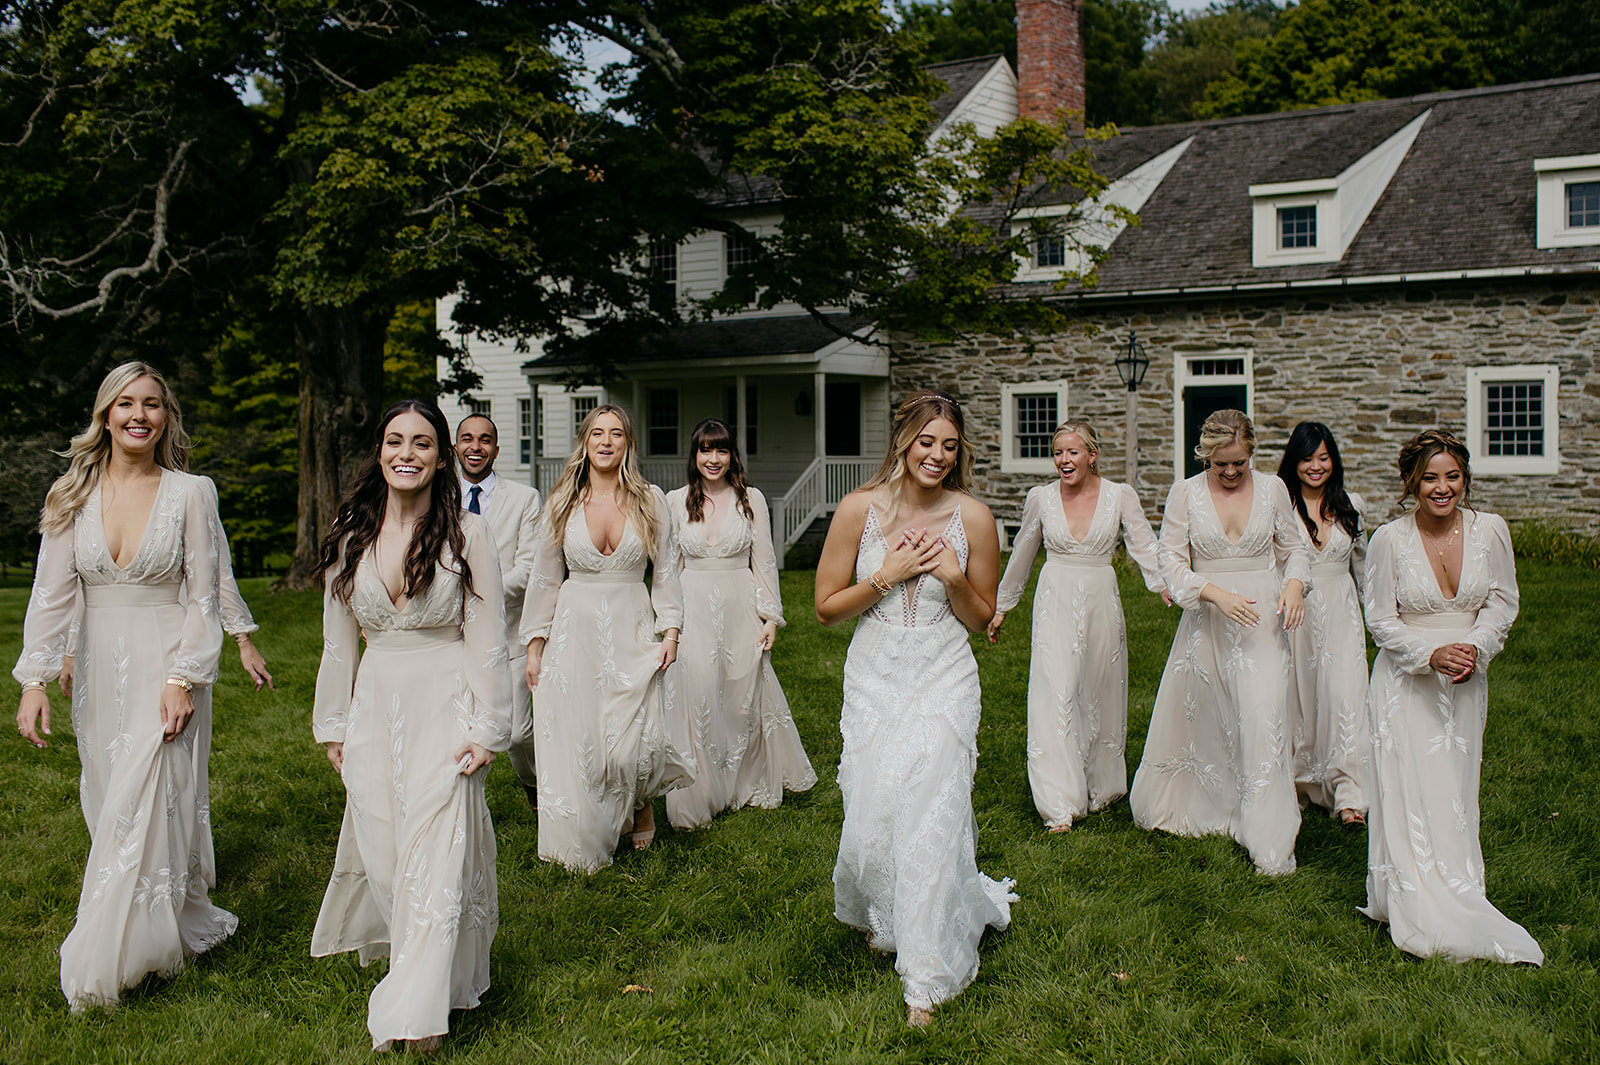 Bonita-Gabrielle-Logan-Smith-Photography-Monica-Relyea-Events-the-Dutchess-Staatsburg-Grasmere-Farm-Rhinebeck-Hudson-Valley-New-York-Wedding-Planner-weekend-rehearsal-dinner-drinks-after-party-Heirloom-Fire6T6A2701